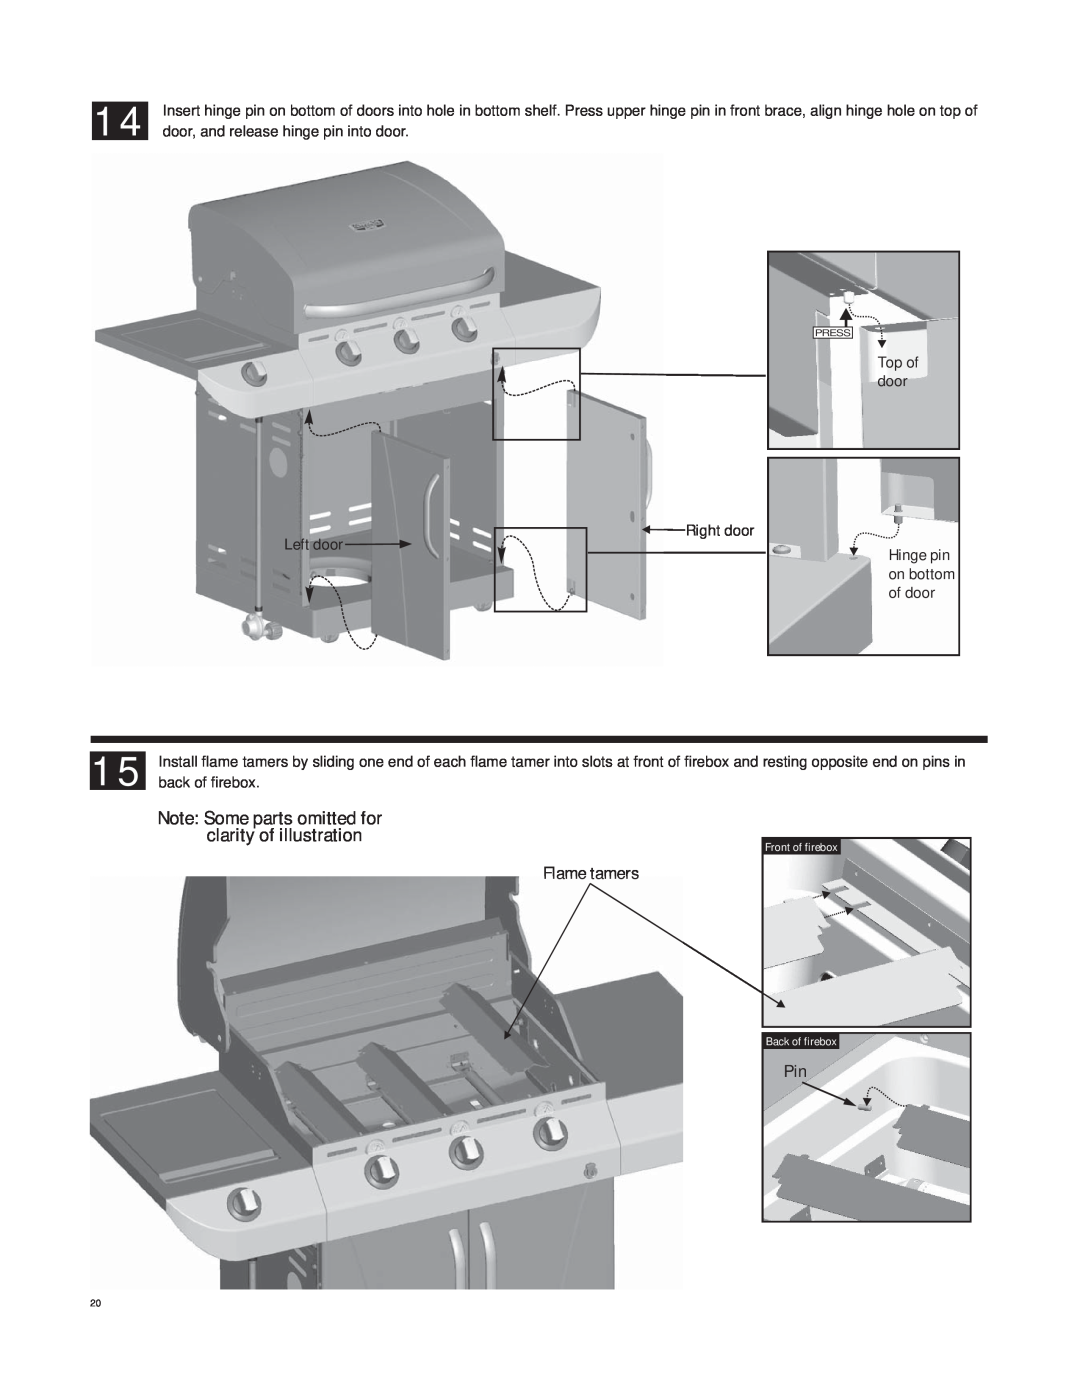 Char-Broil 463247412 manual Note Some parts omitted for clarity of illustration, Flame tamers 